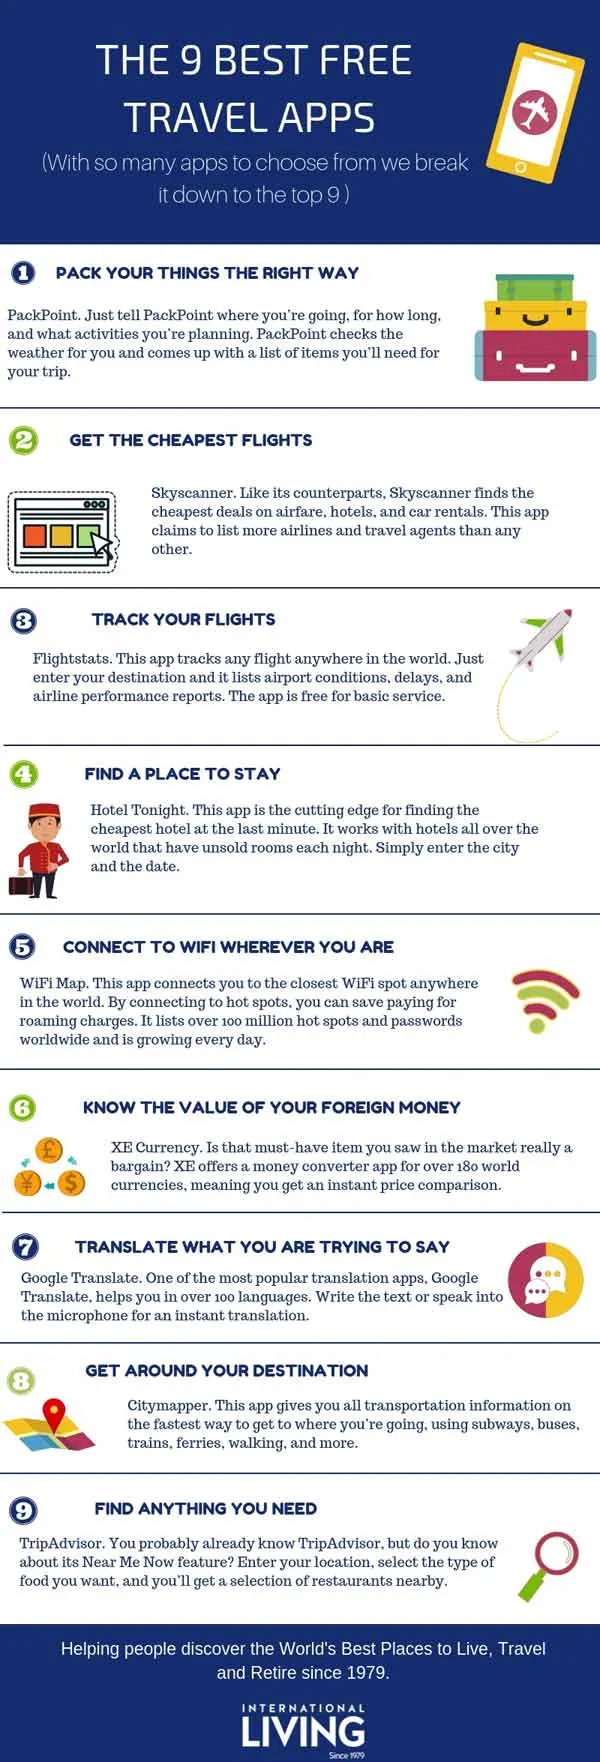 Best Travel Apps Infographic